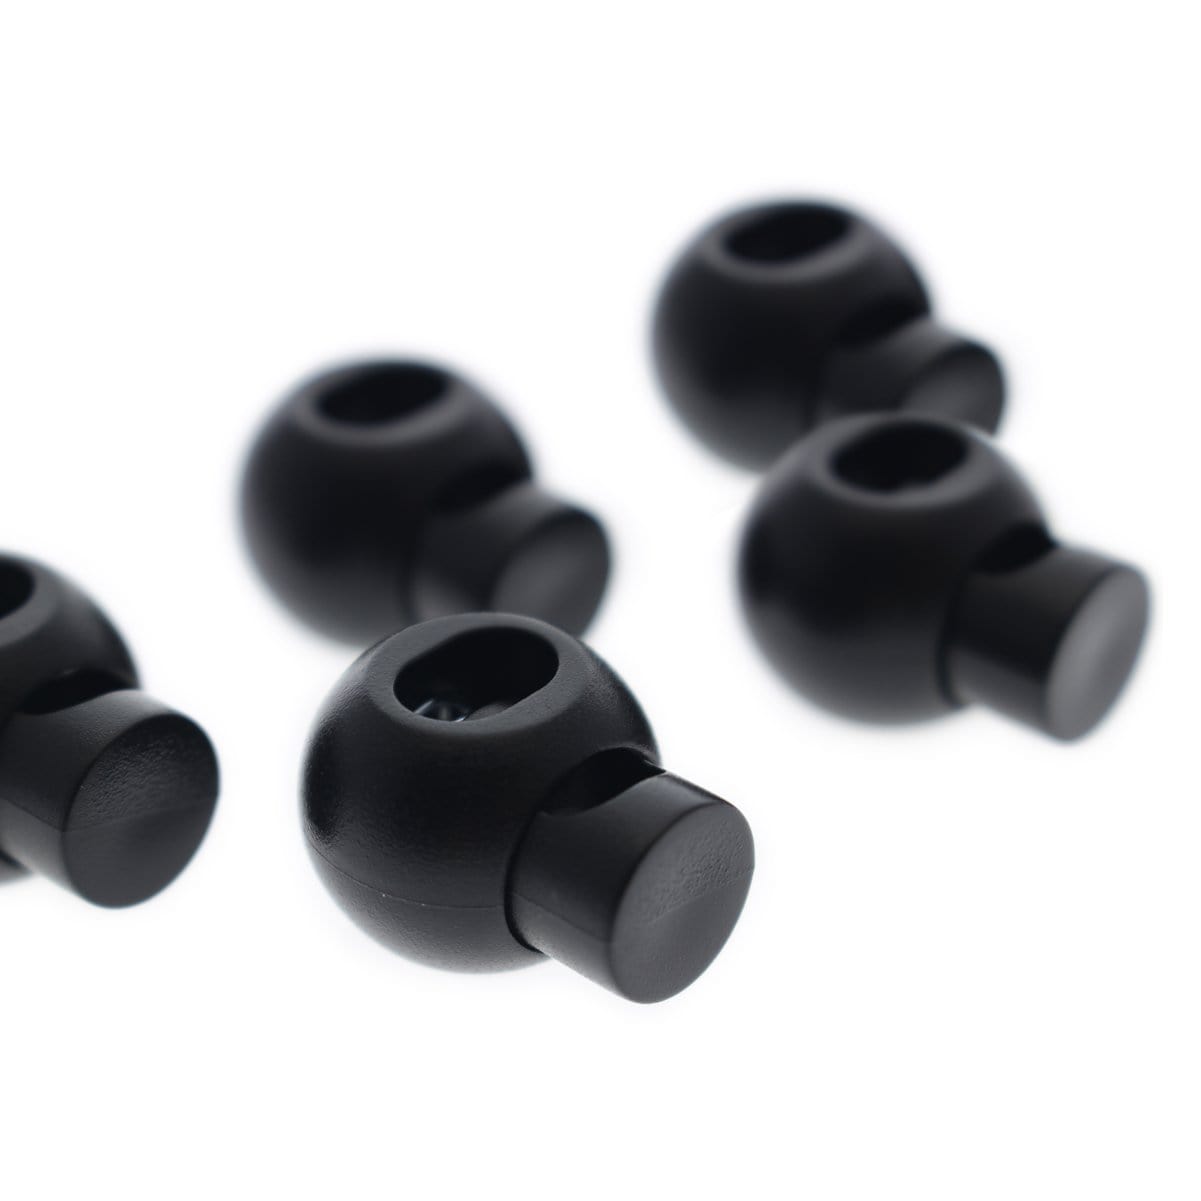 Four black interchangeable earbud tips and two Adjustable Cord Lock - Round Ball Style - Single Hole End Toggles for DIY Projects (2135-4001) are arranged on a white background.